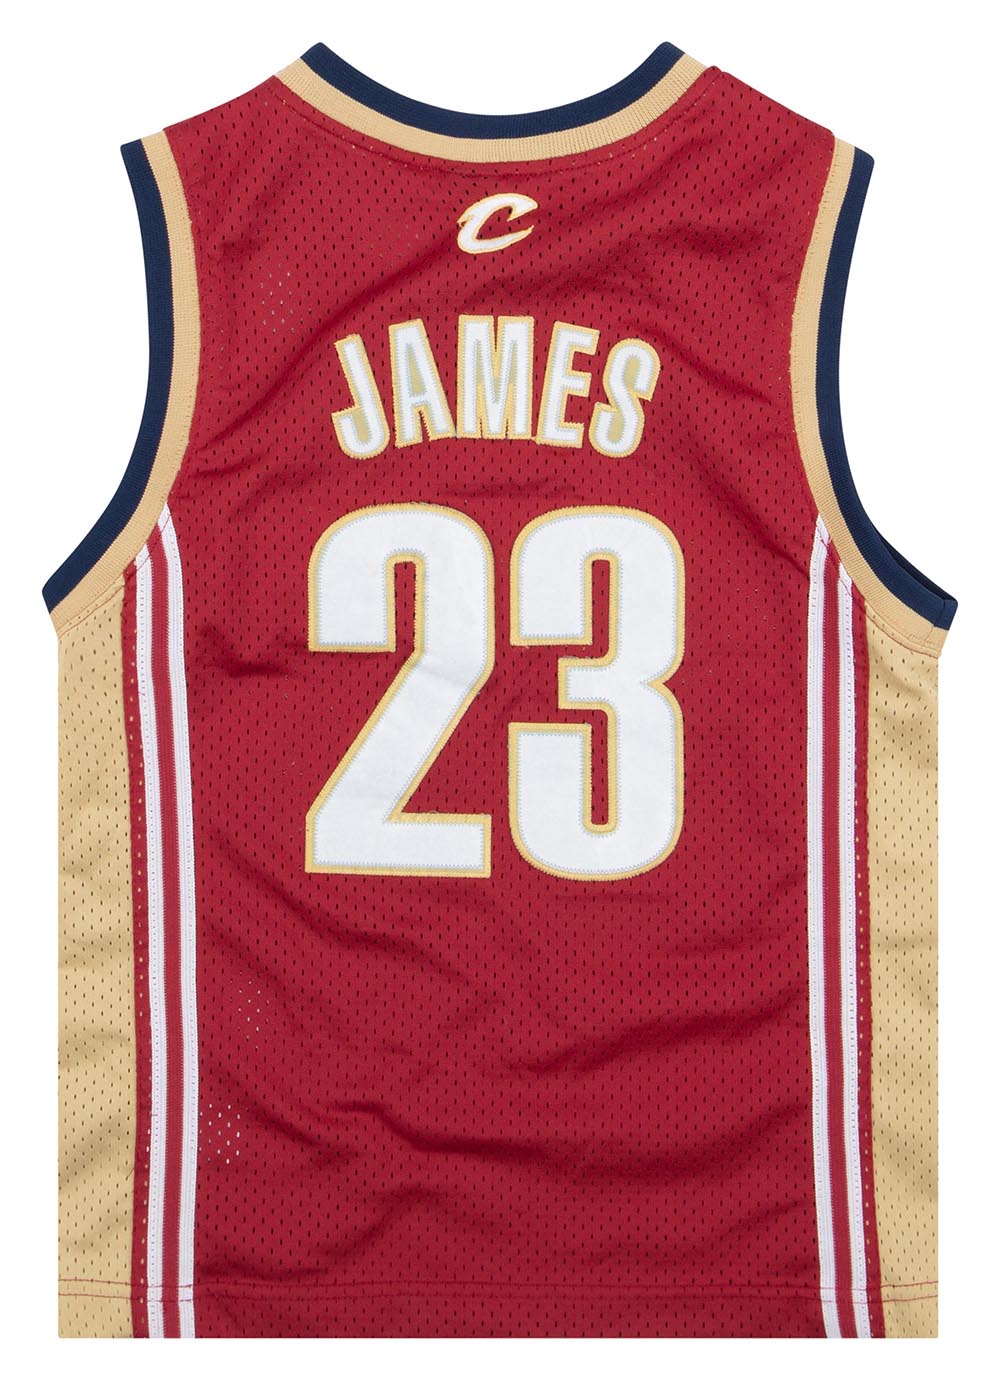 My final jersey mockup before the reveal Monday : r/clevelandcavs